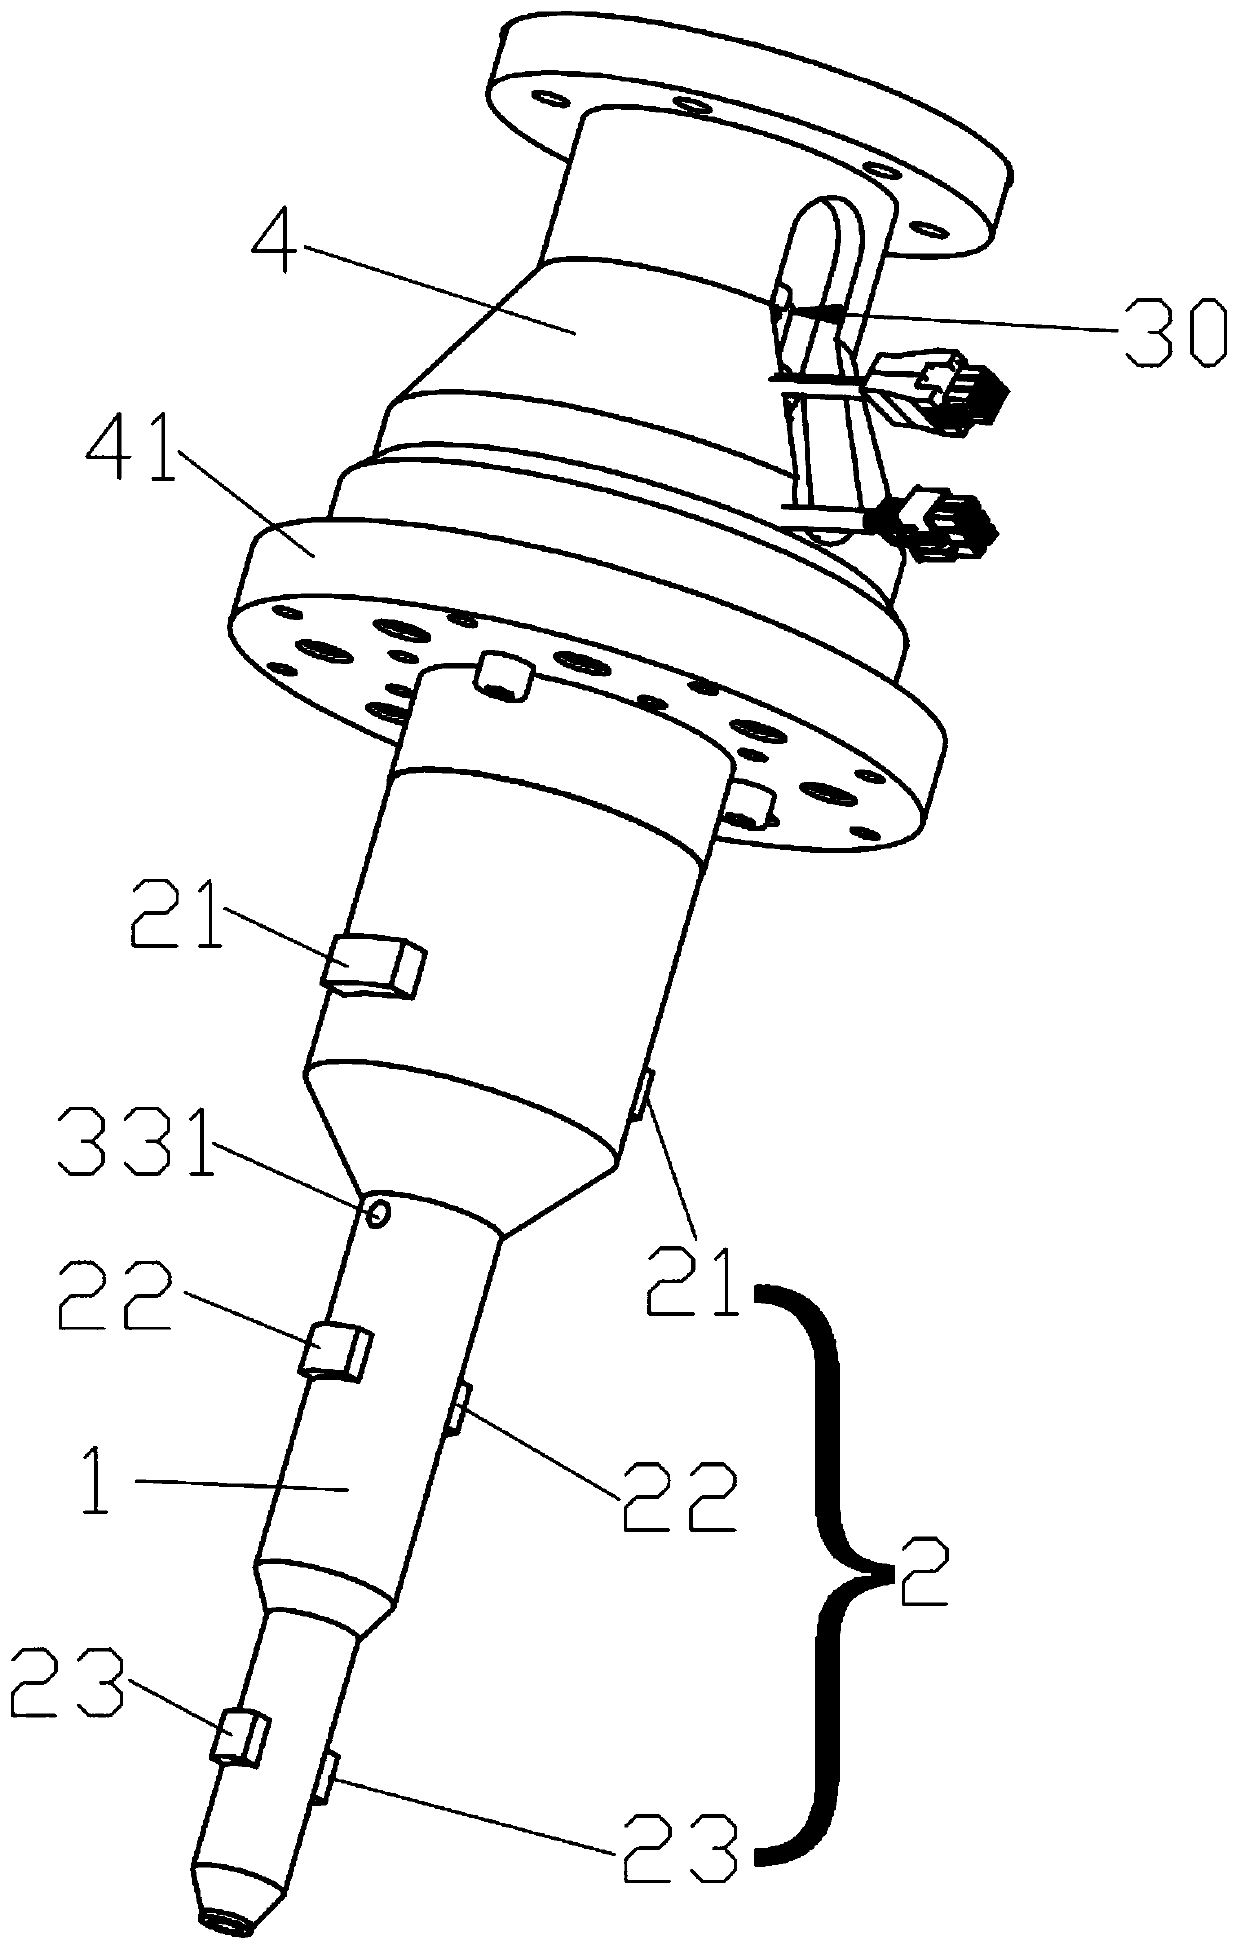 Disk lifting and grasping device